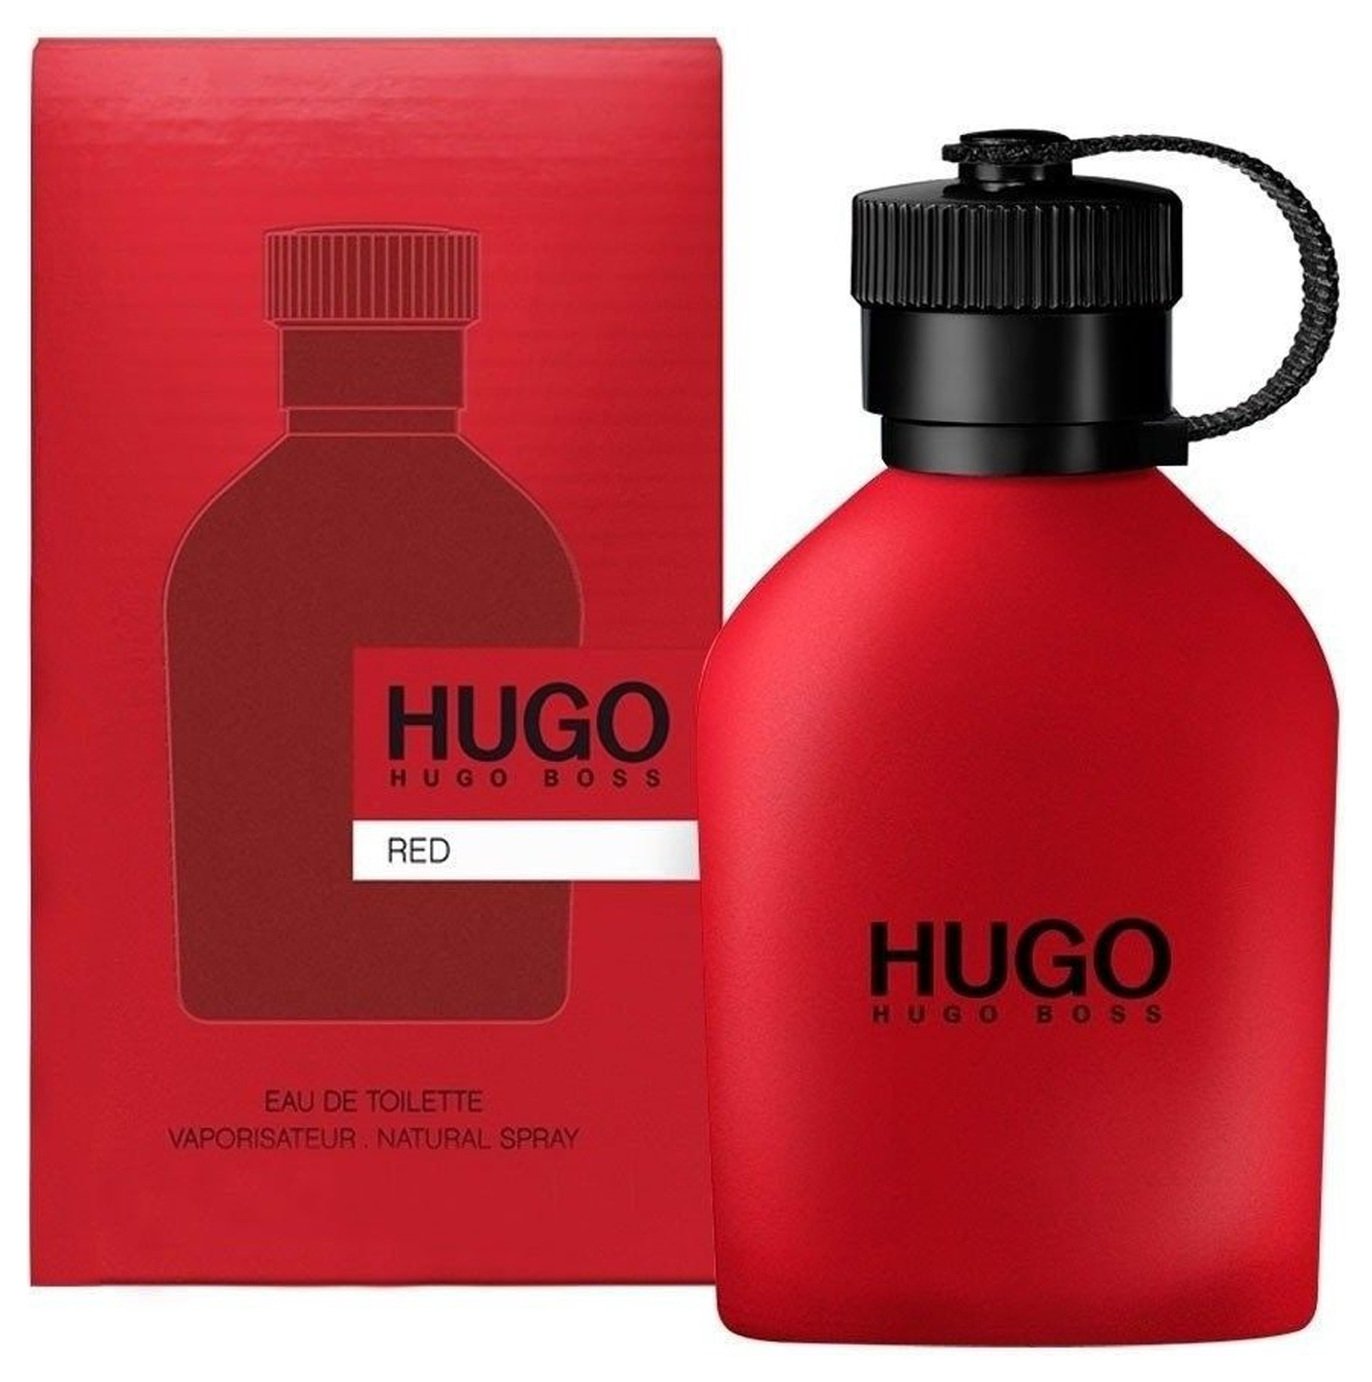 cheapest place to buy hugo boss aftershave